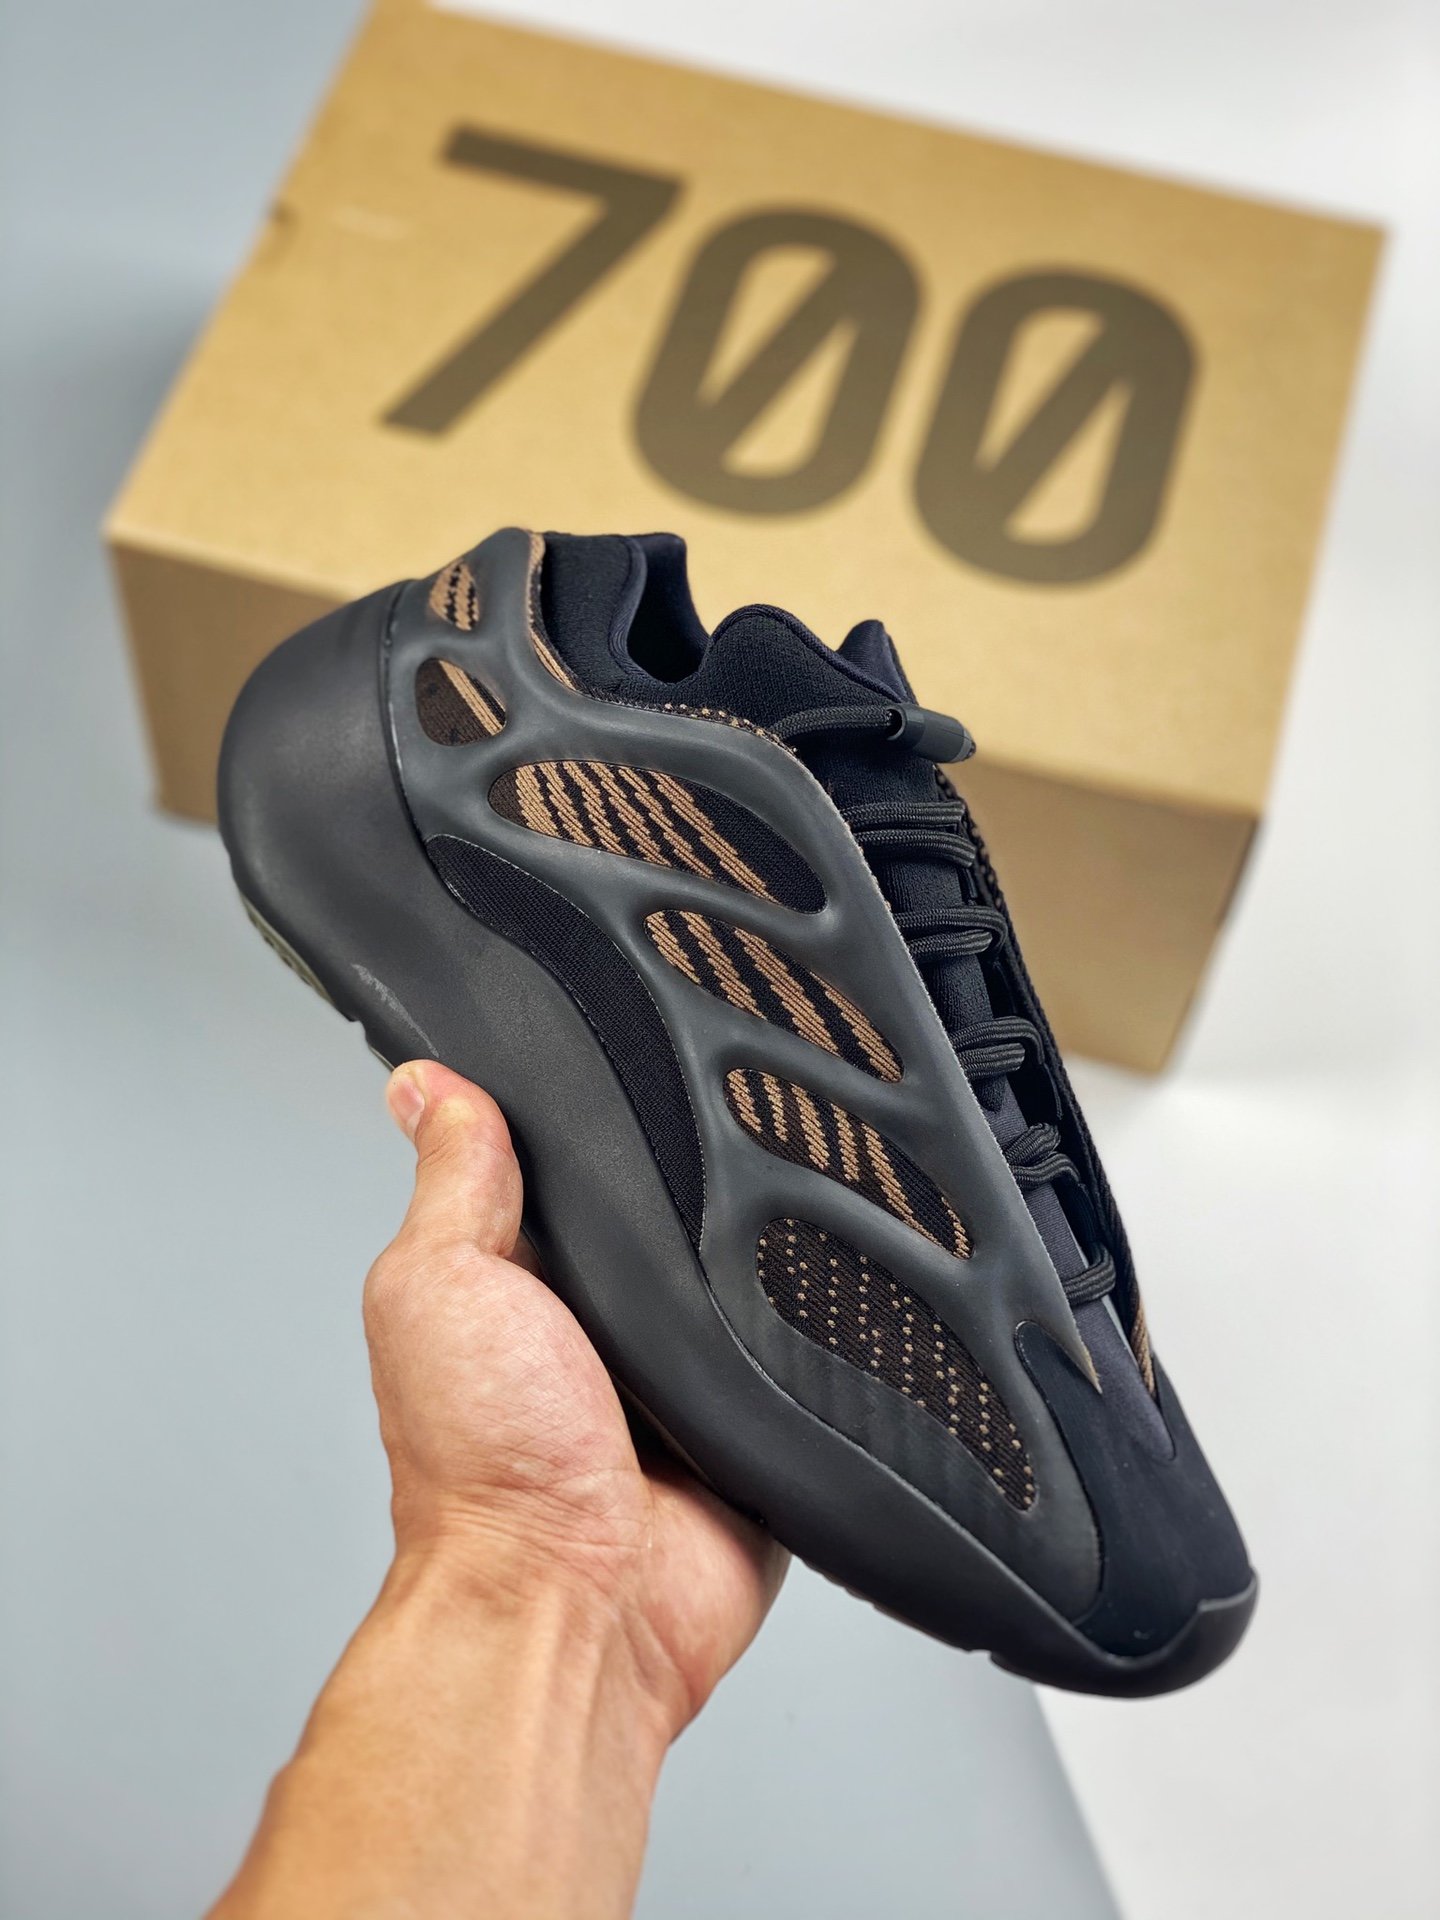 adidas Yeezy 700 V3 "Clay Brown" Shoes